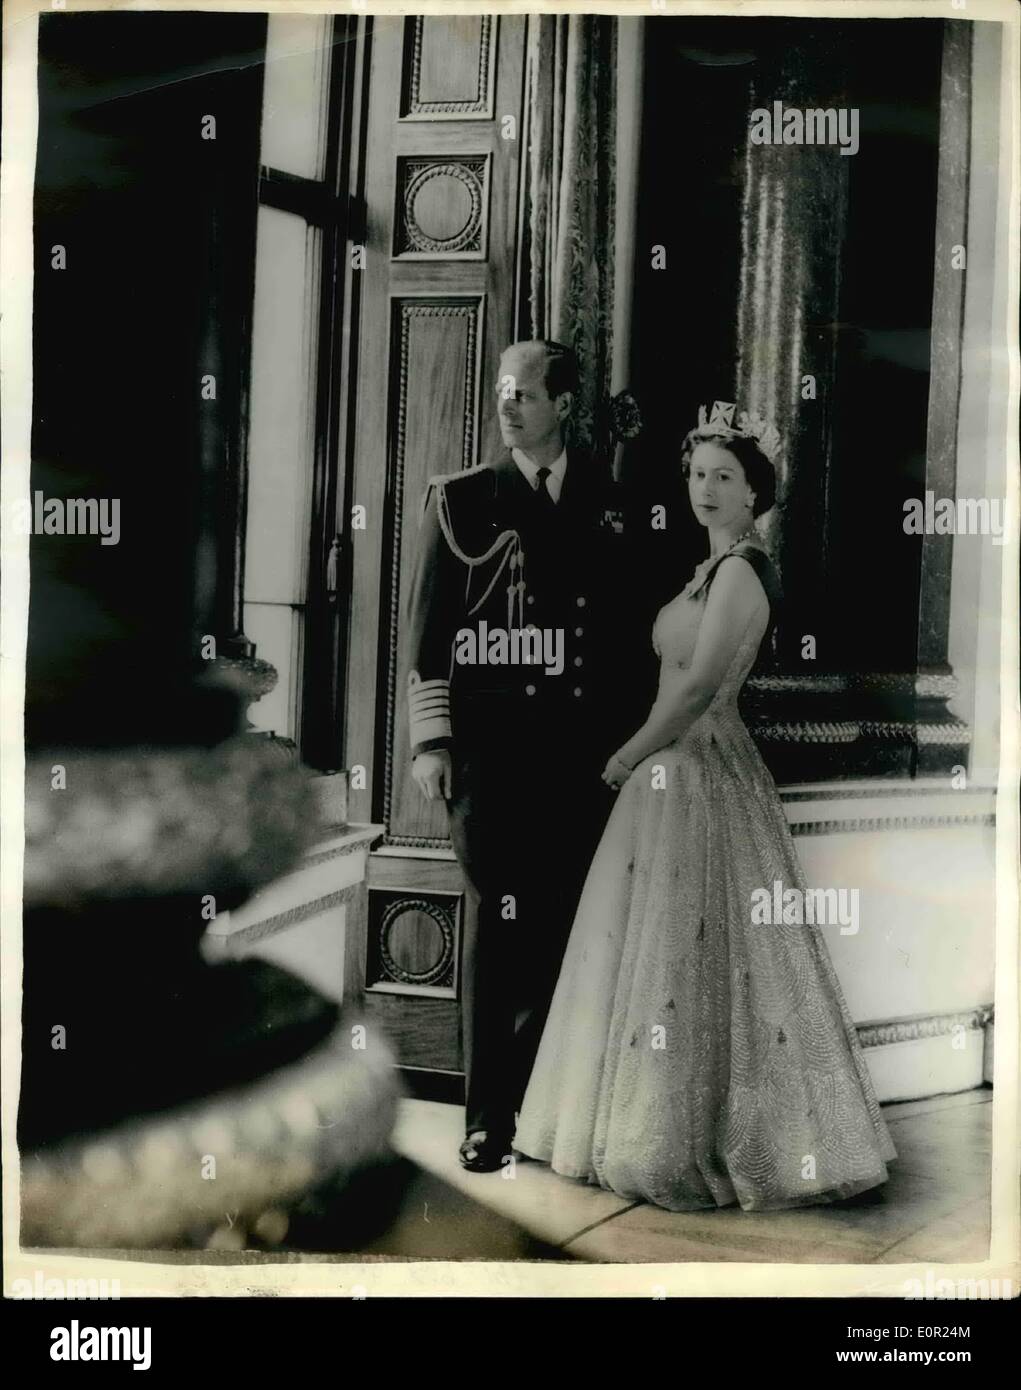 Oct. 10, 1957 - H.M. The Queen and Prince Philip, Duke of Edinburgh.: This picture was taken in the Music Room of Buckingham Palace. Her Majesty is wearing a shimmering gown of white tulle embroidered in silver and gold. The blue ribbon of the most Noble Order of the Garter is over her left shoulder. The Queen's jewels include a diamond and pearl diadem, earrings and necklace, and a diamond bracelet and watch. She wears the Garter Star and the Badge of st. George, set in diamonds; the miniatures on the Queen's left shoulder portray her father and grandfather Stock Photo